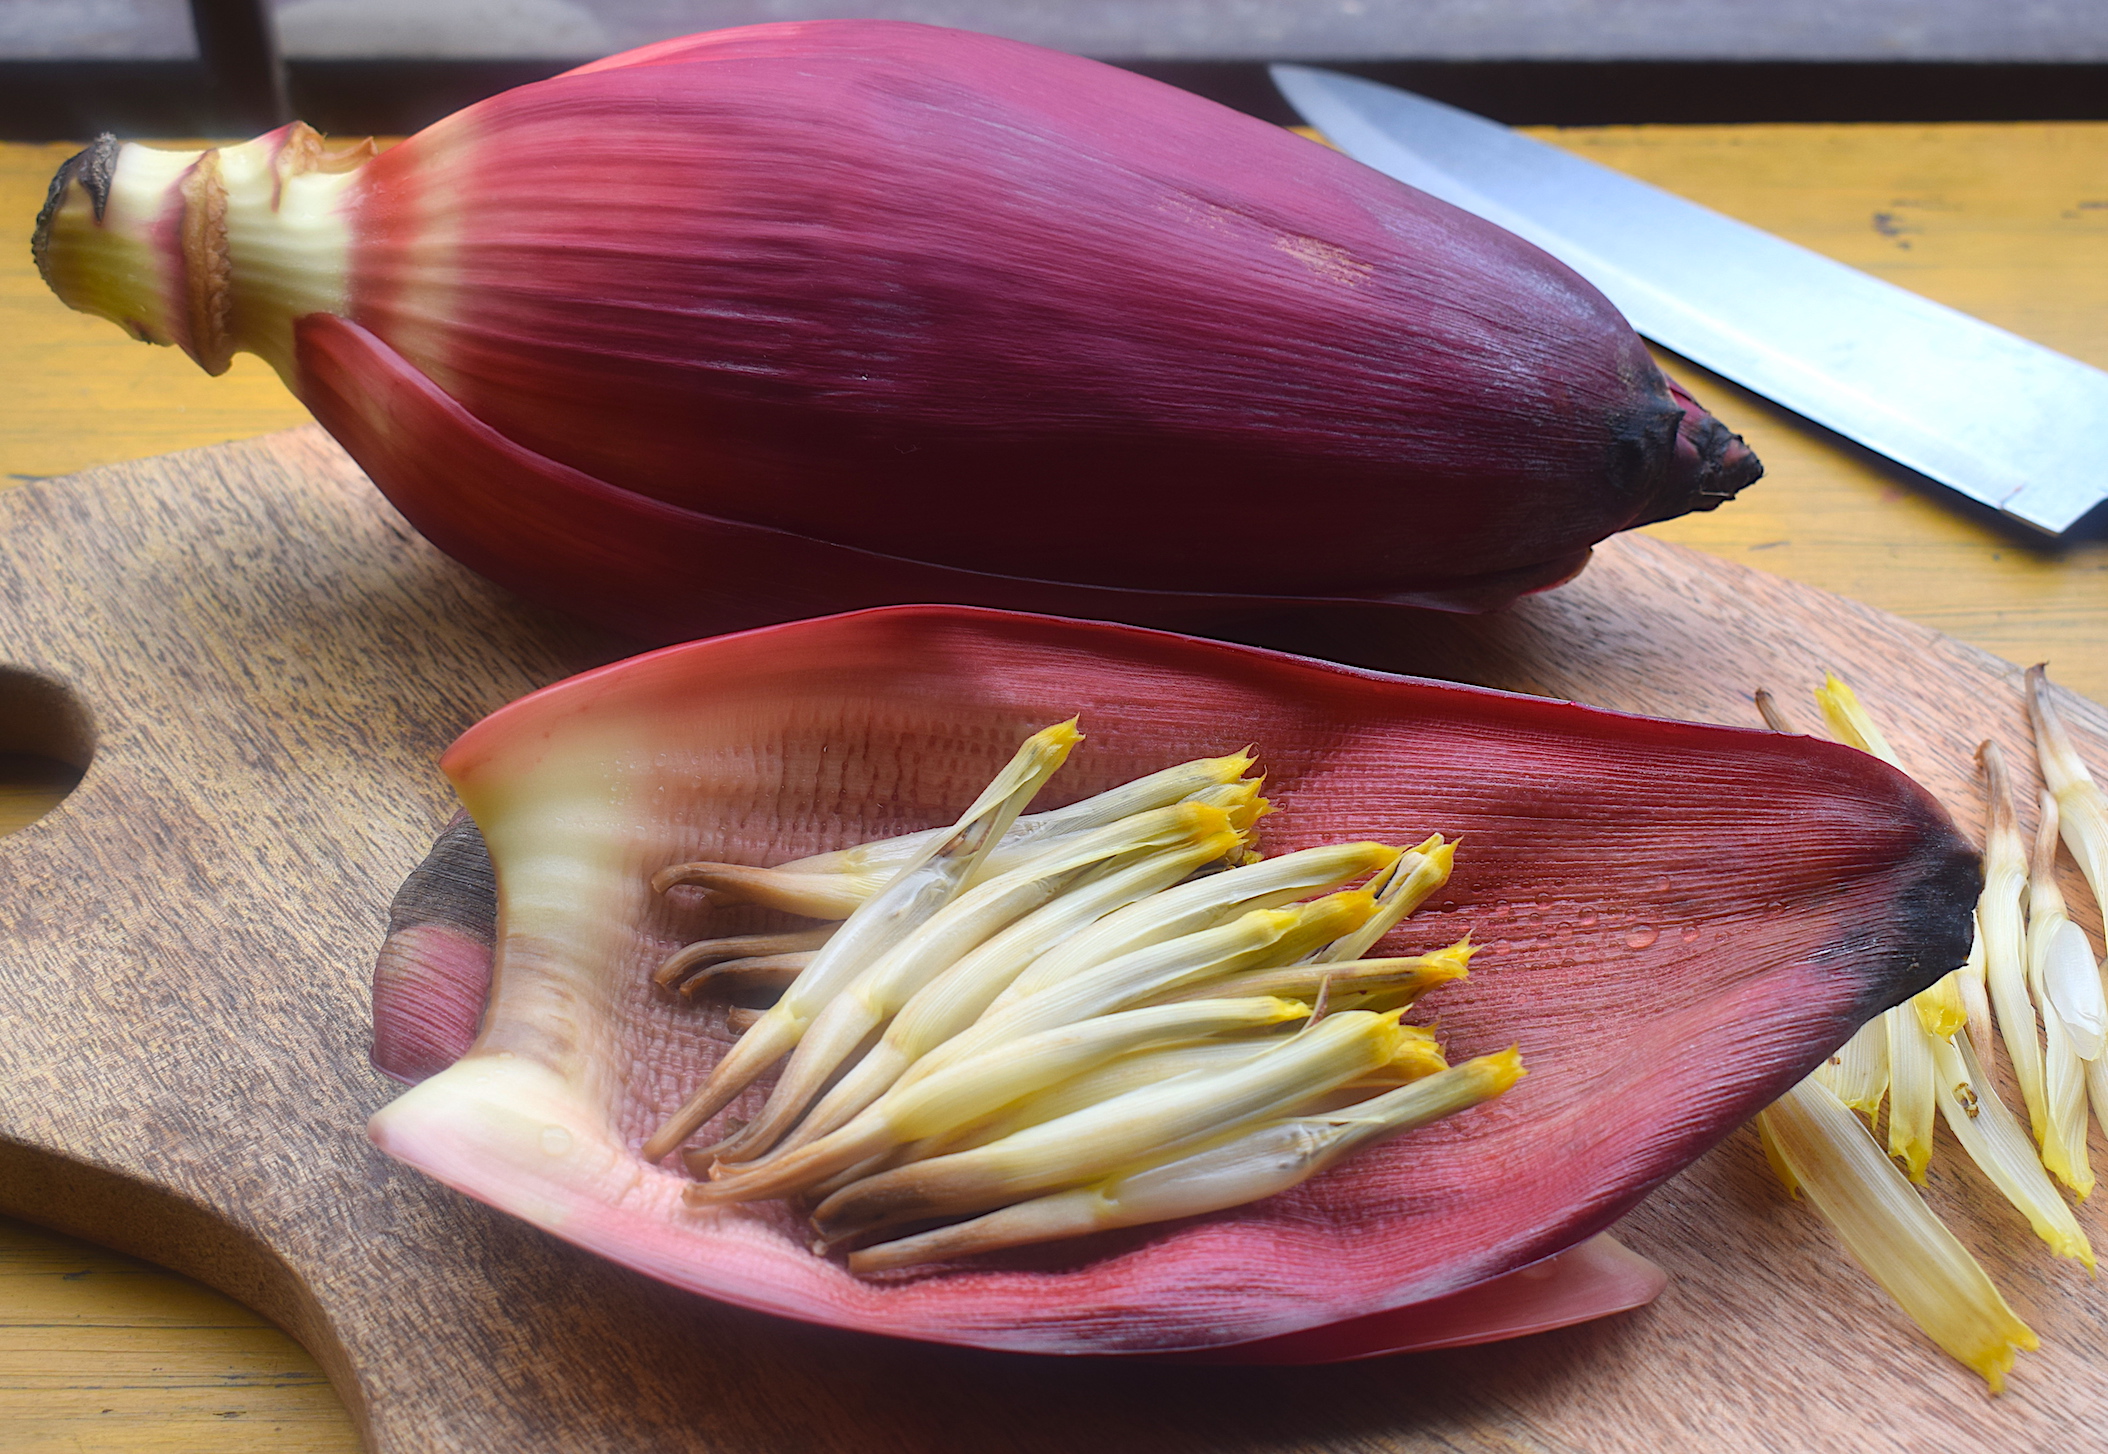 Banana Flower With Potatoes Recipes For The Regular Homecook,Stair Carpeting Options